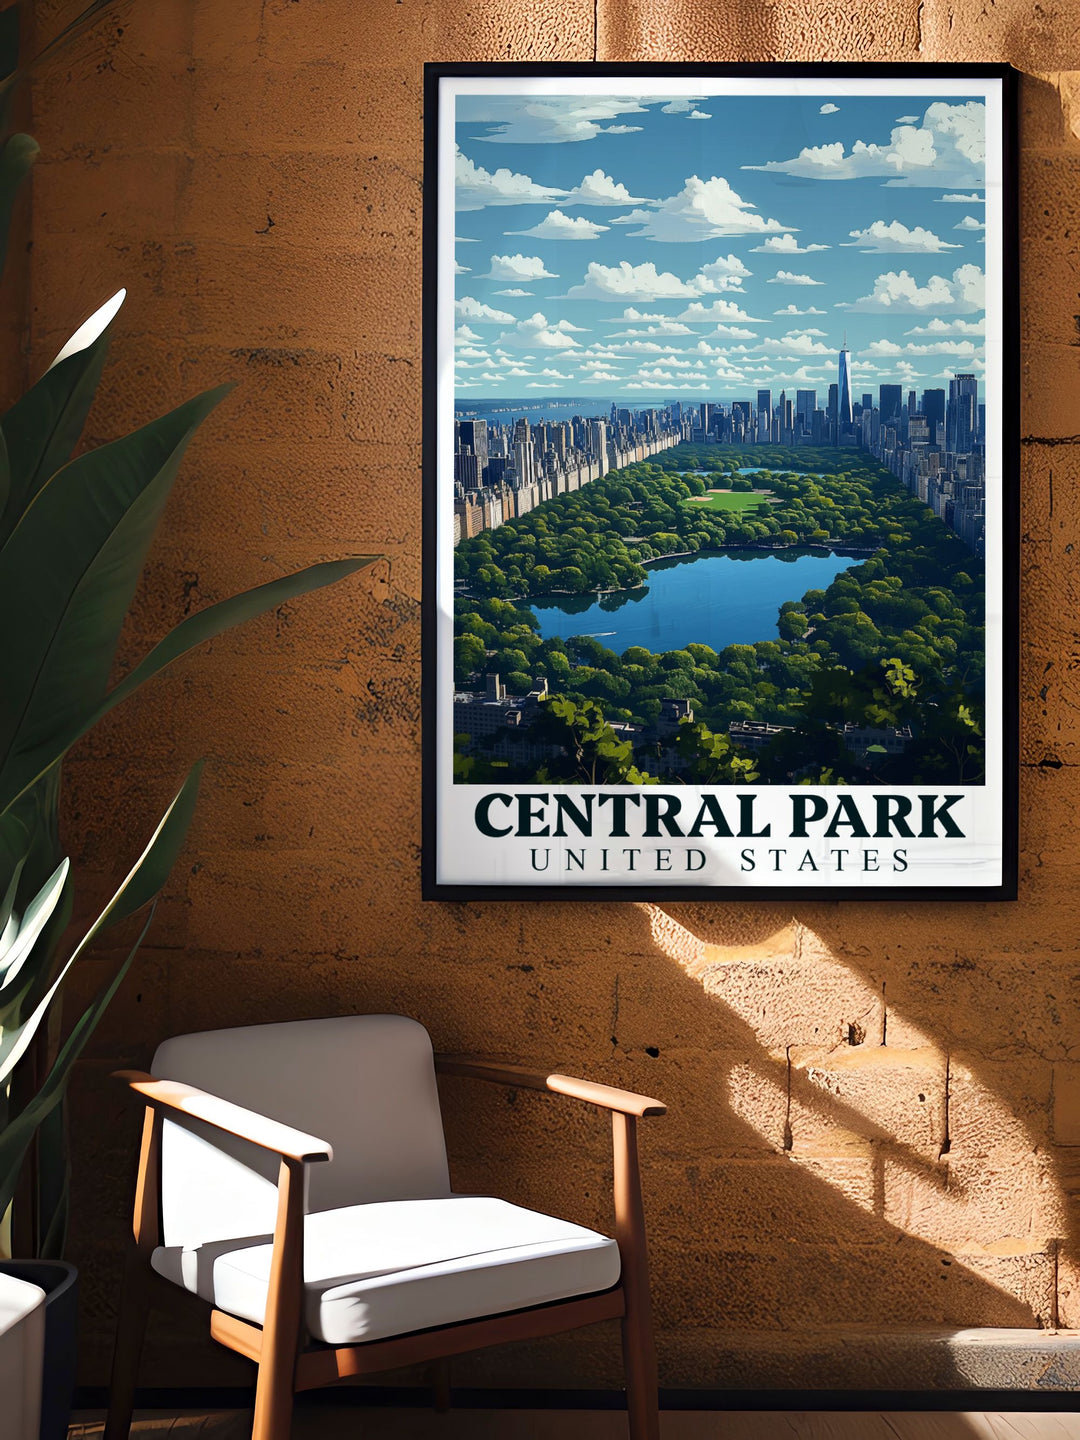 This travel poster captures the serene beauty of Central Parks Lake from an aerial perspective, perfect for adding a touch of New York Citys natural charm to your home decor.